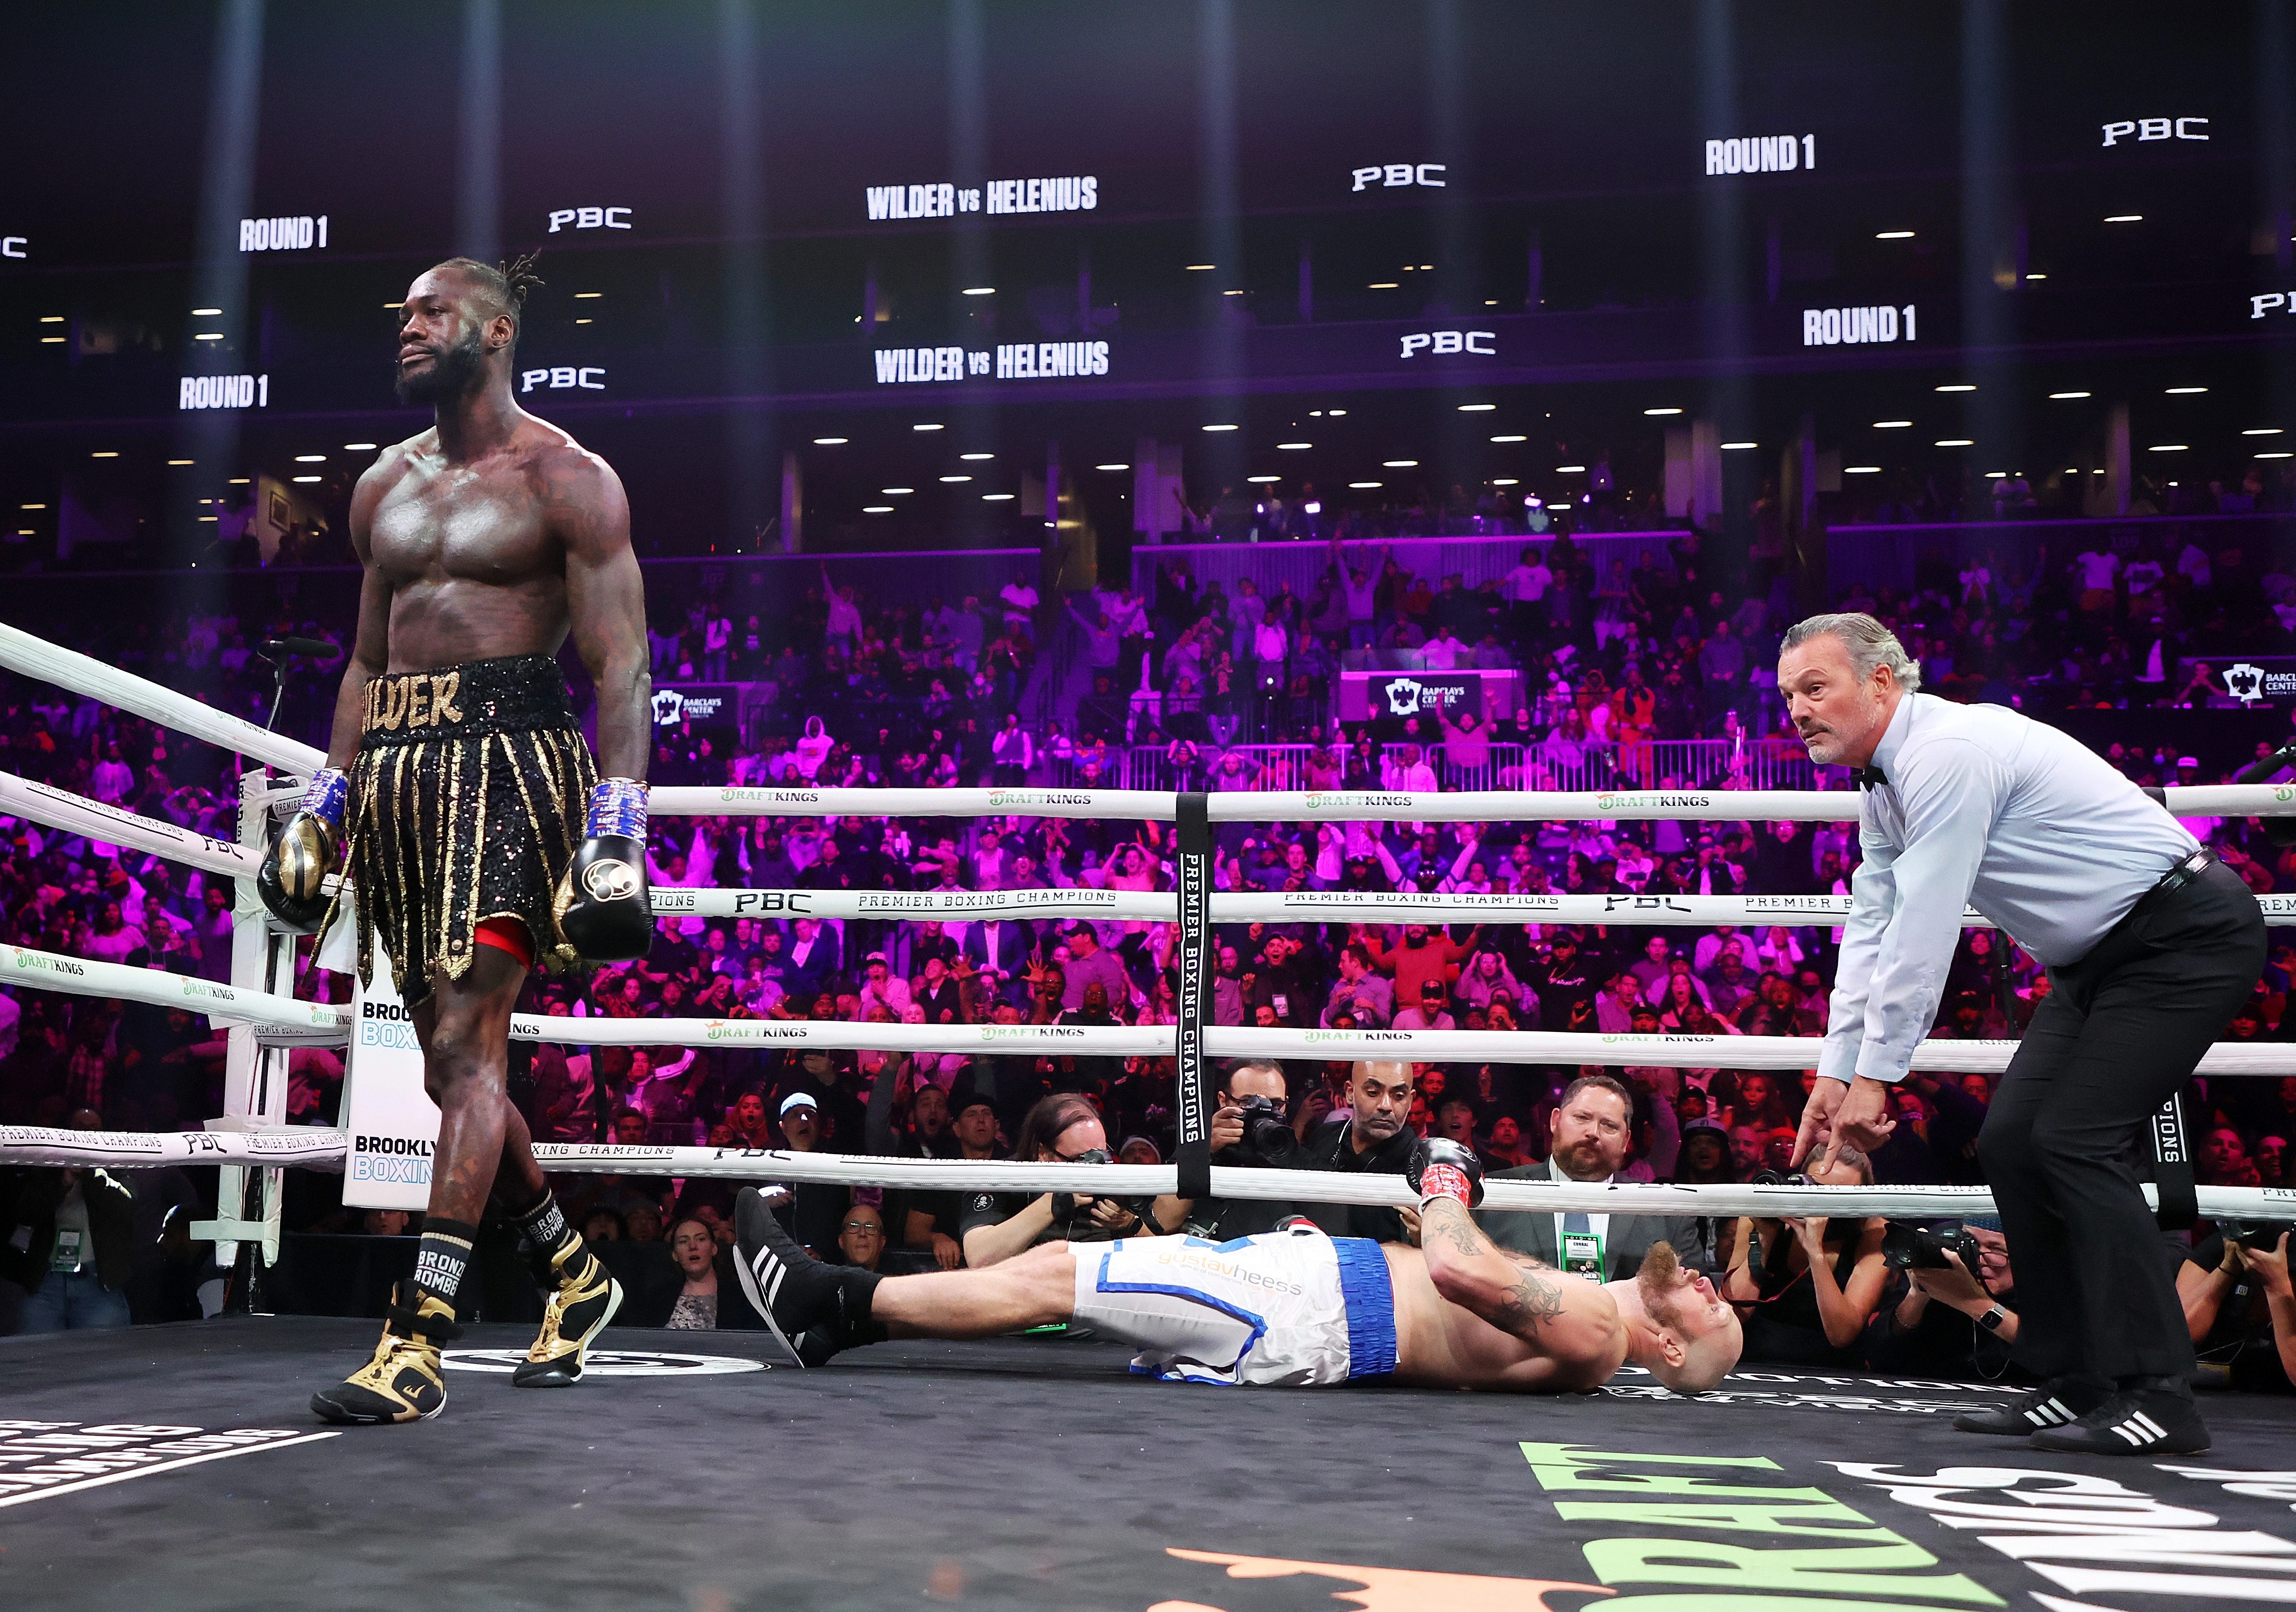 , Next five potential opponents for Dillian Whyte with Anthony Joshua front of queue after win over Jermaine Franklin